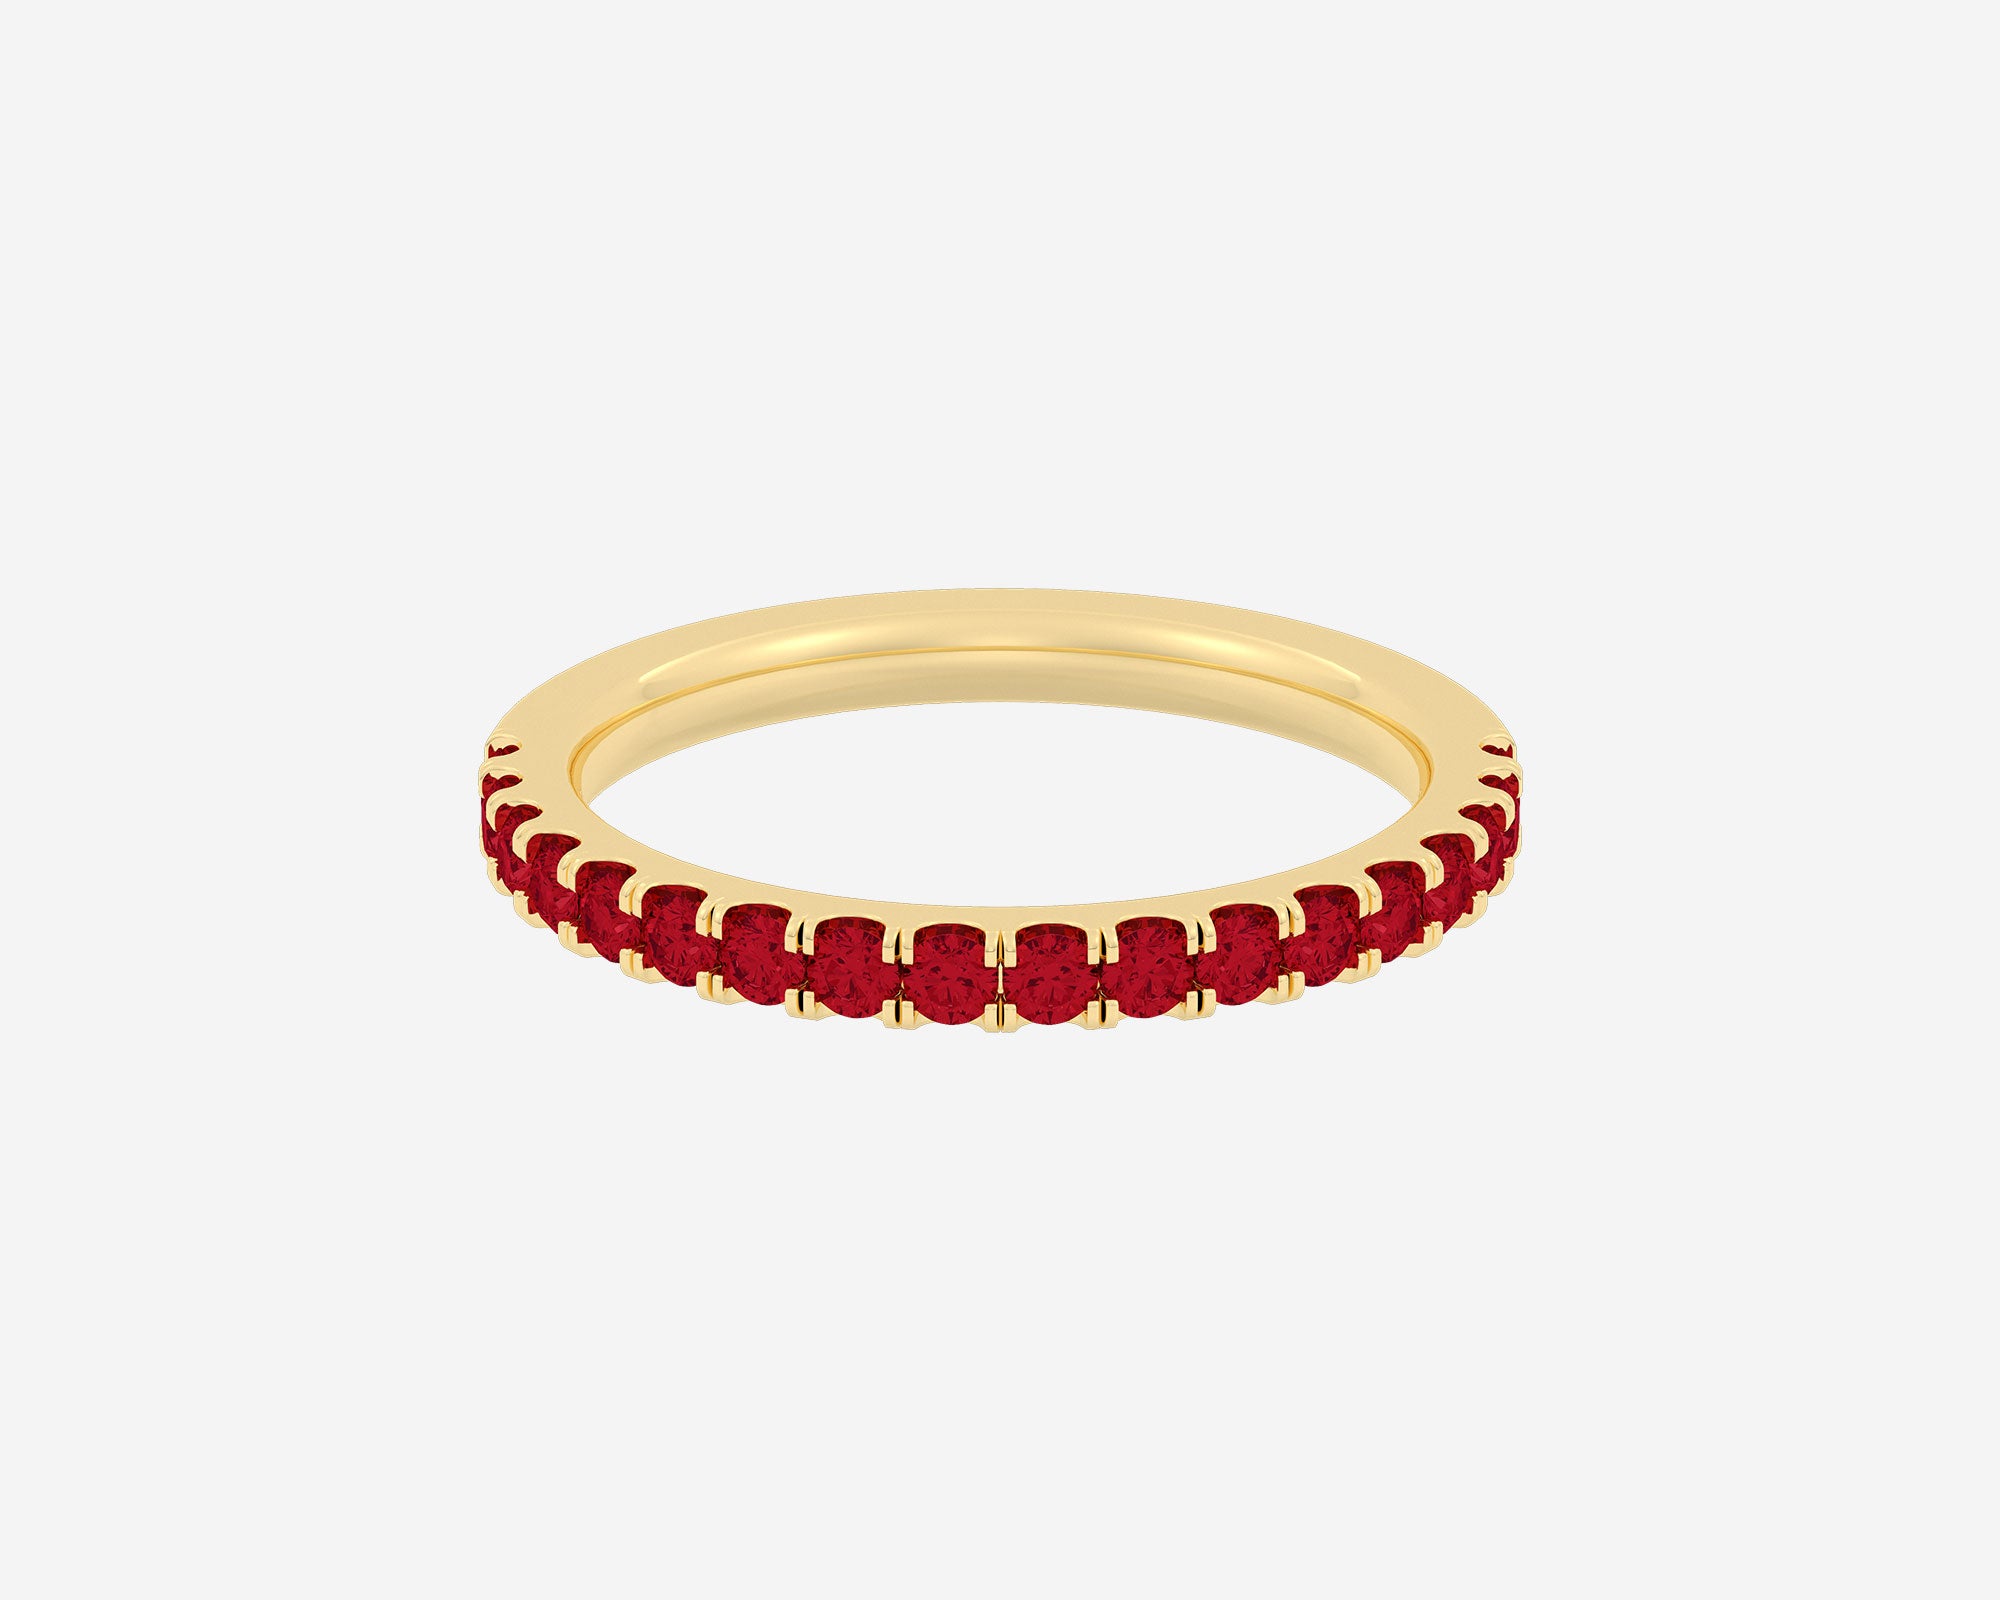 The Gem Half Eternity ring by Holden in yellow gold with rubies